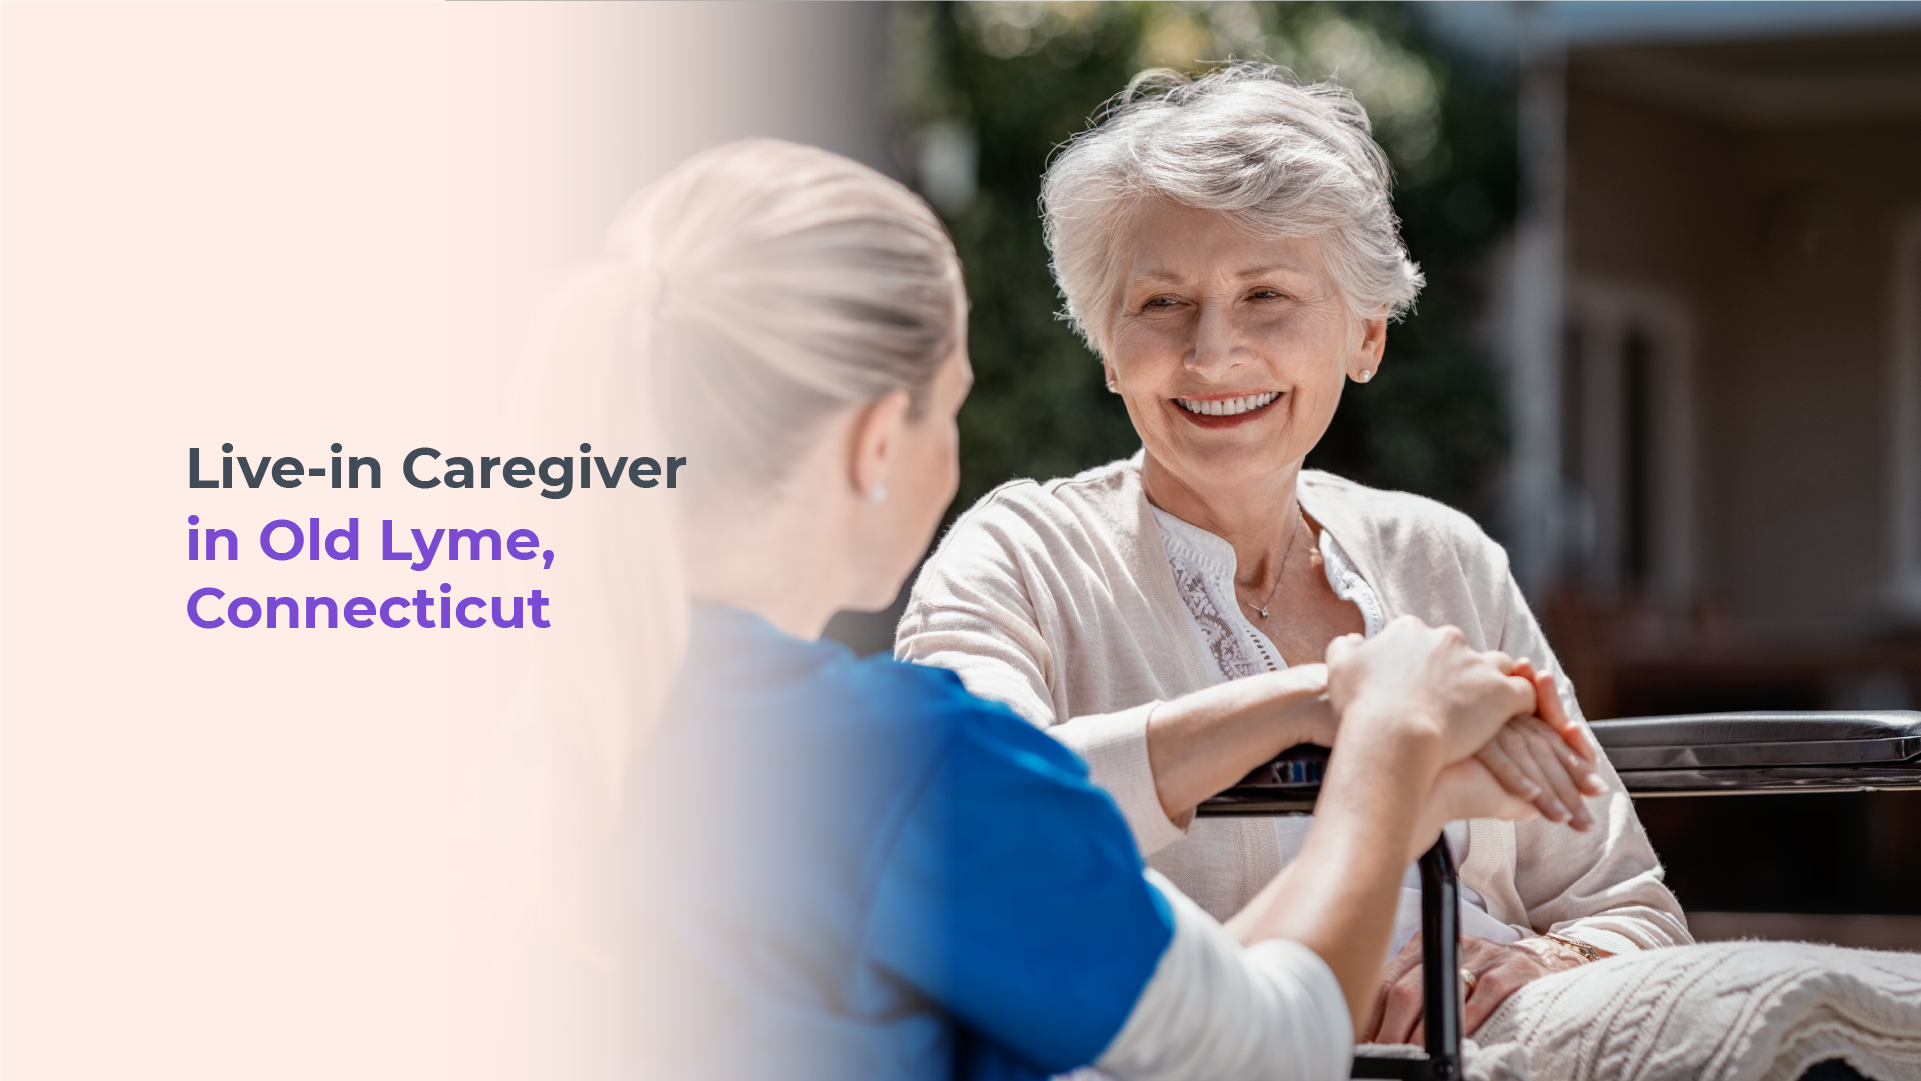 Live-in Caregivers in Old Lyme